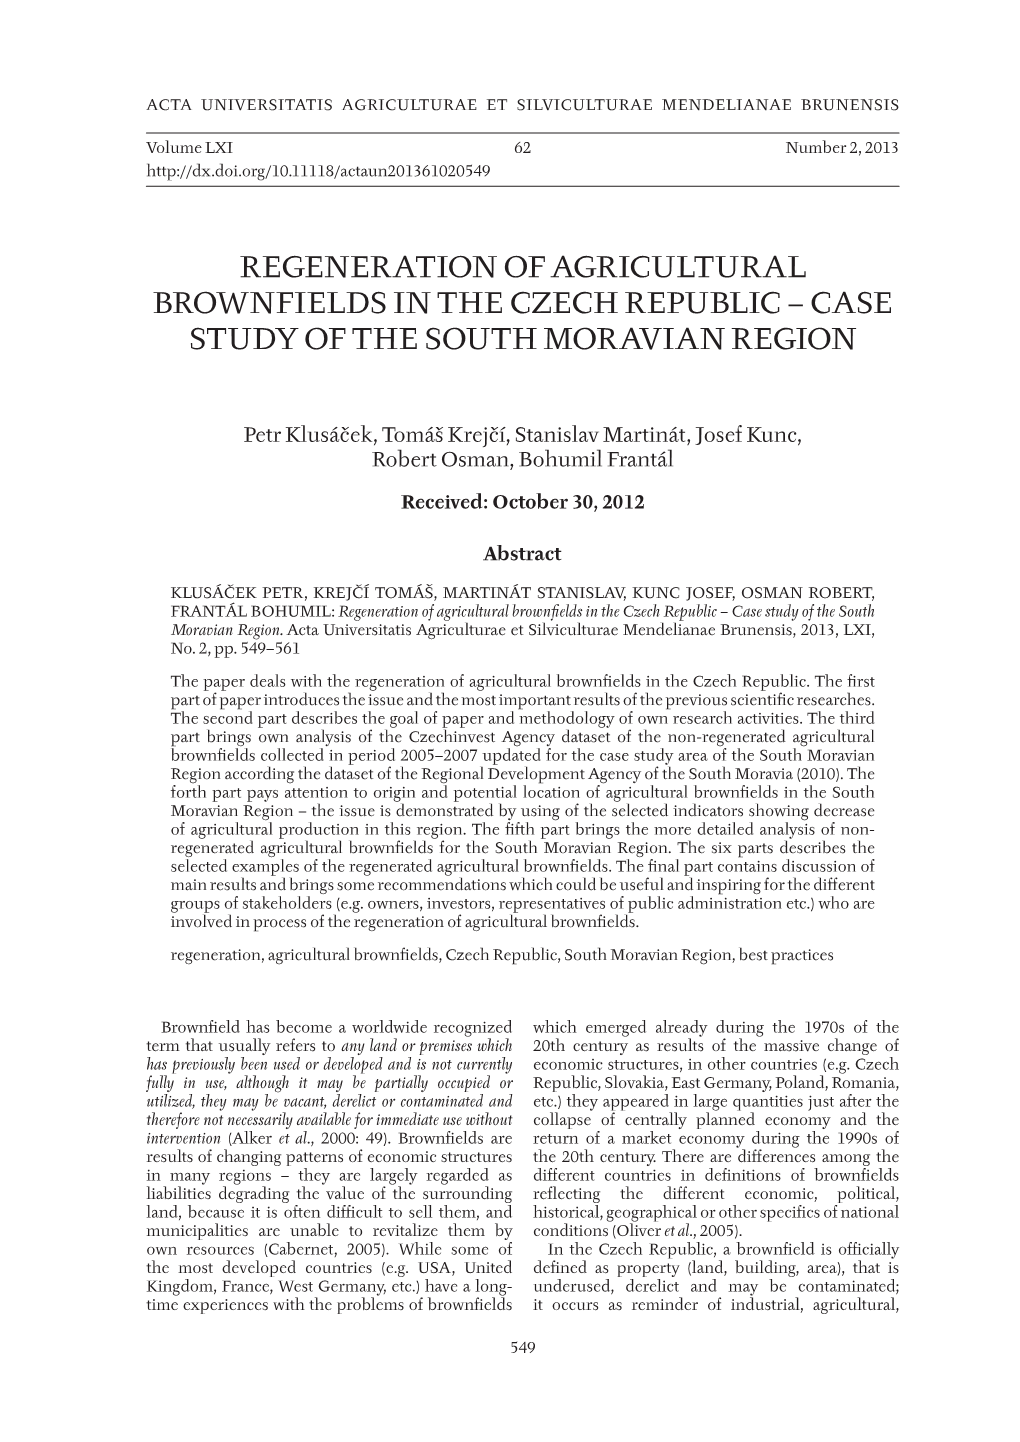 Regeneration of Agricultural Brownfields in the Czech Republic – Case Study of the South Moravian Region